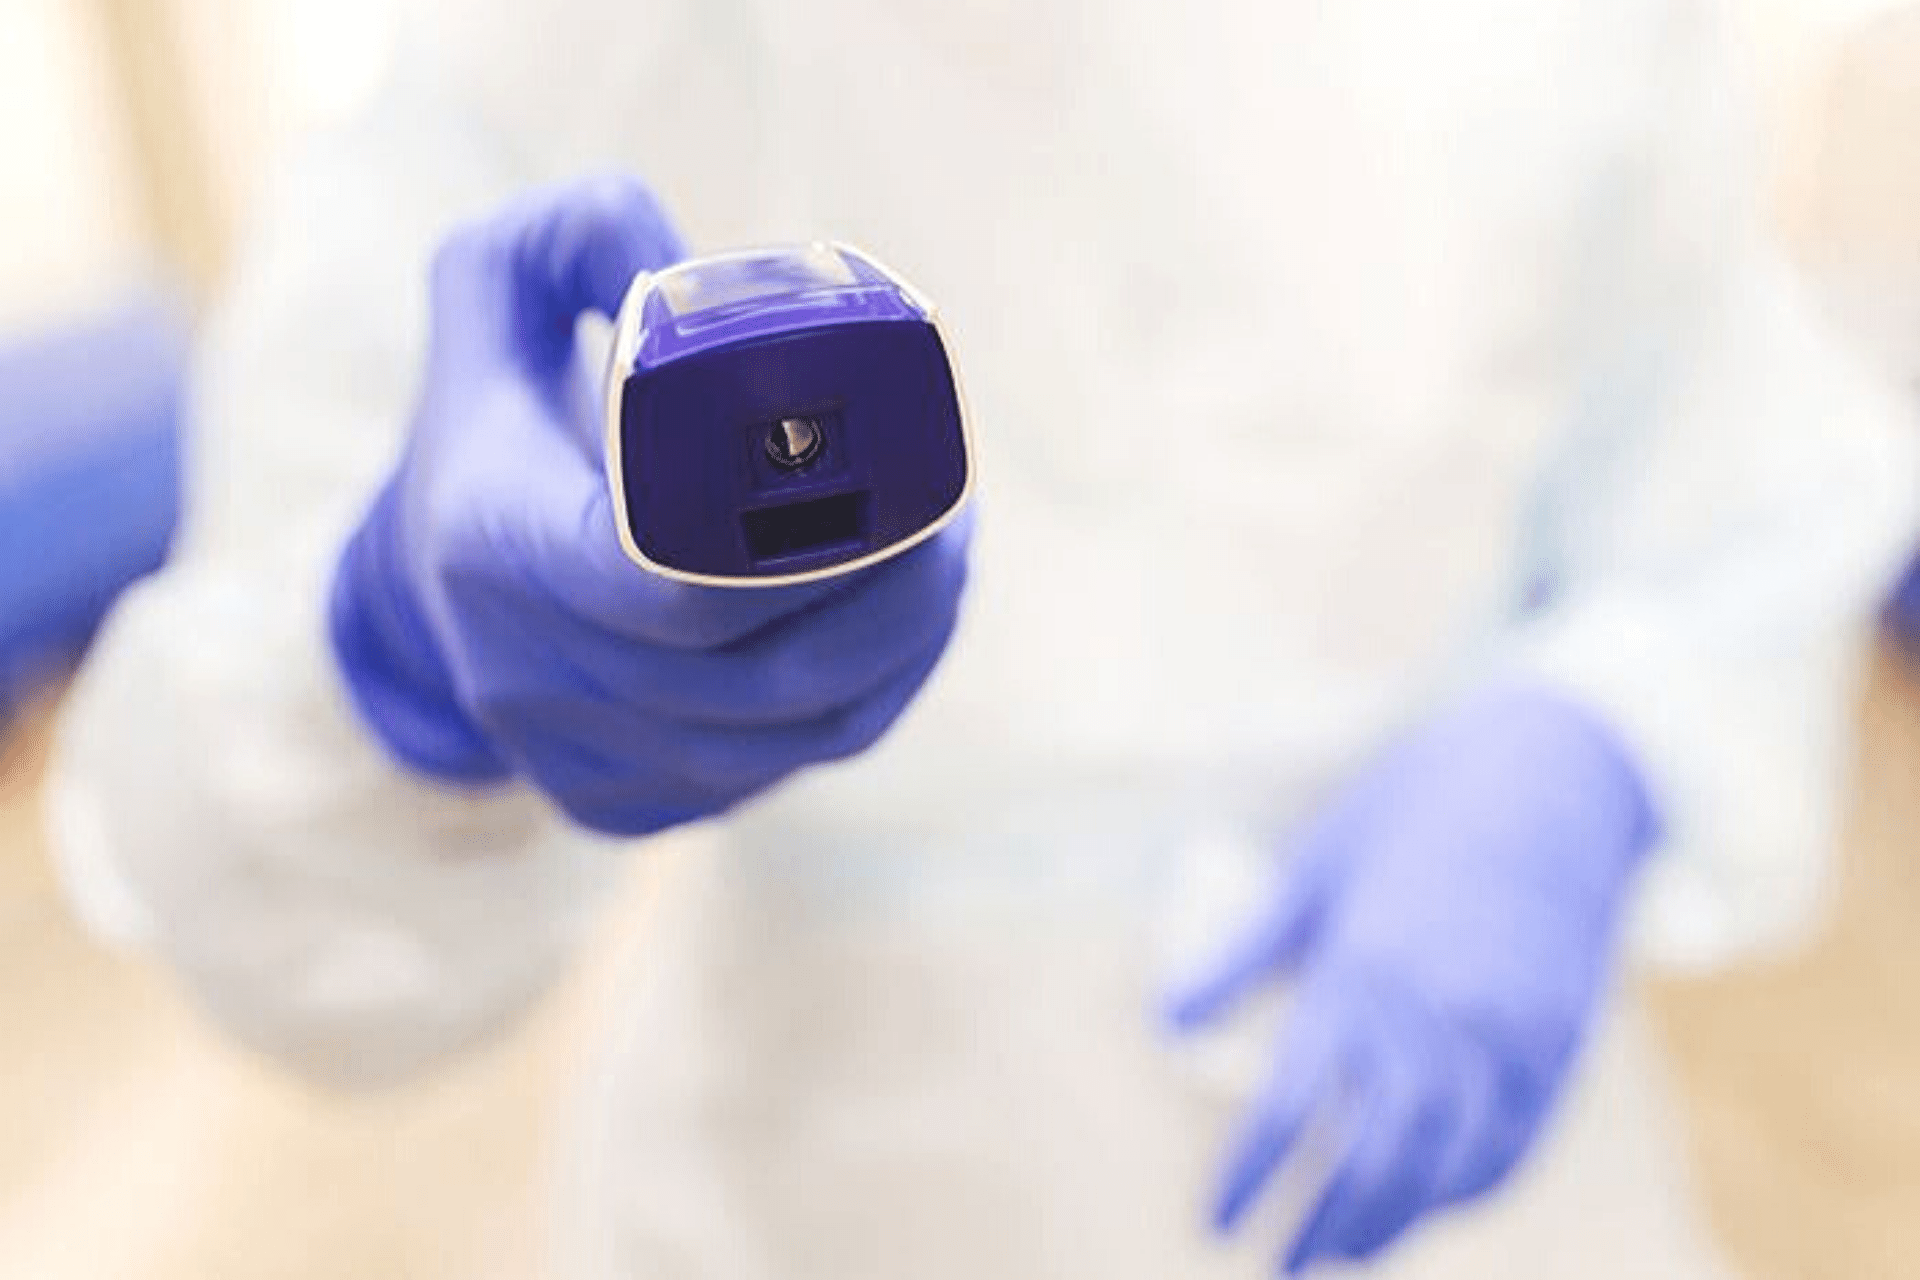 Image of a contact-less thermometer held by a medical professional with purple gloves on.